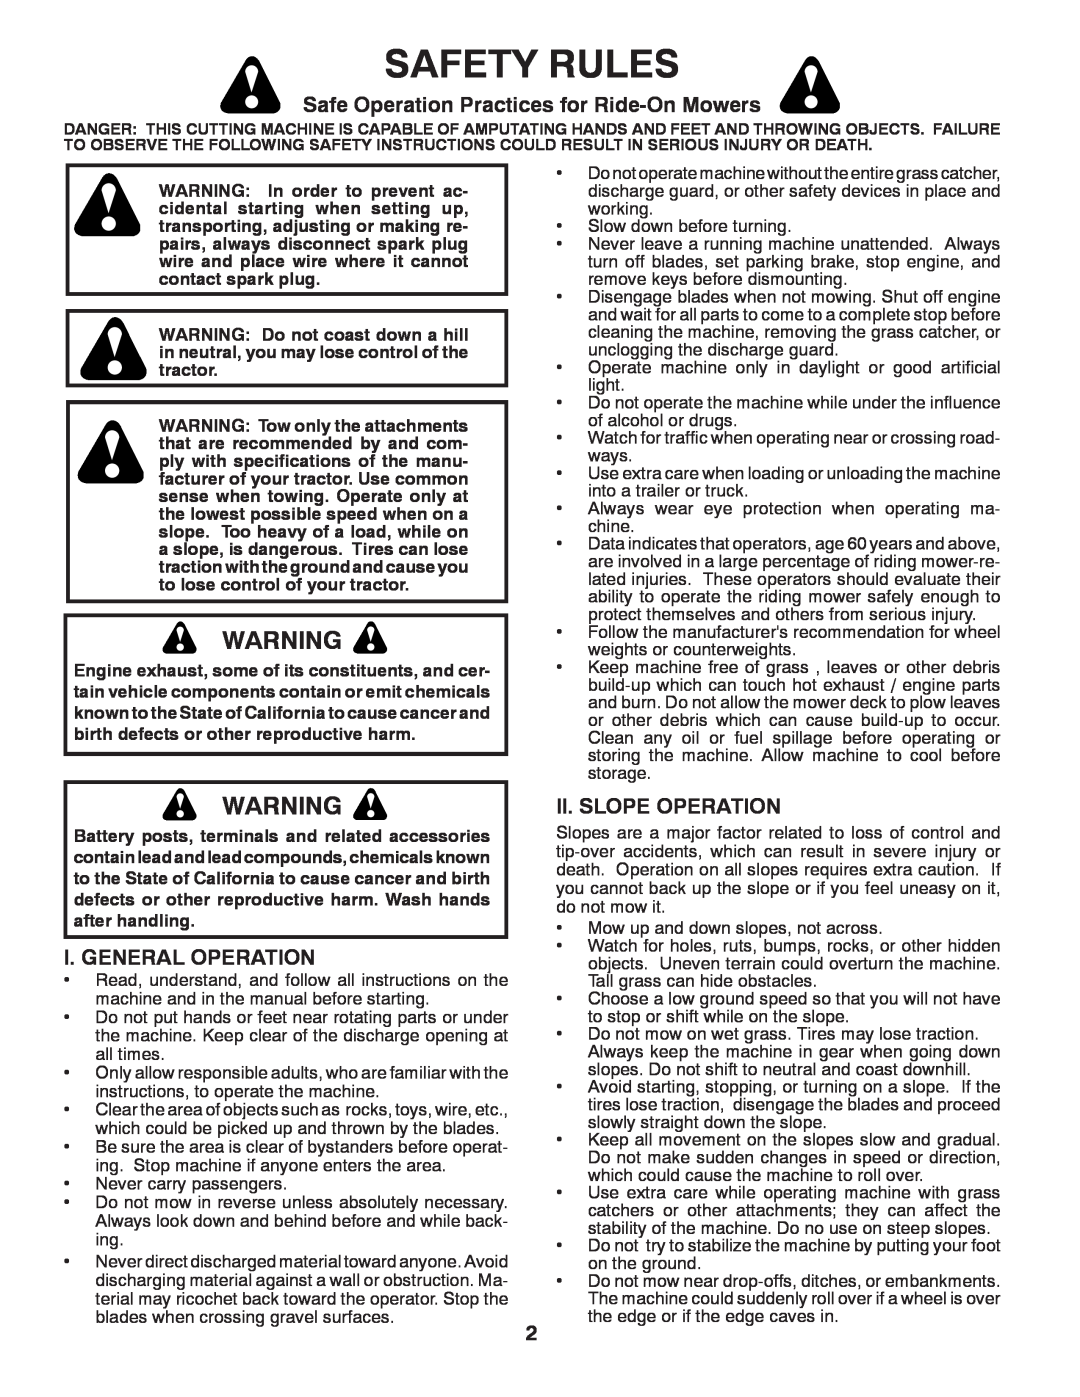 Poulan 96042007300 Safety Rules, Safe Operation Practices for Ride-On Mowers, I. General Operation, Ii. Slope Operation 